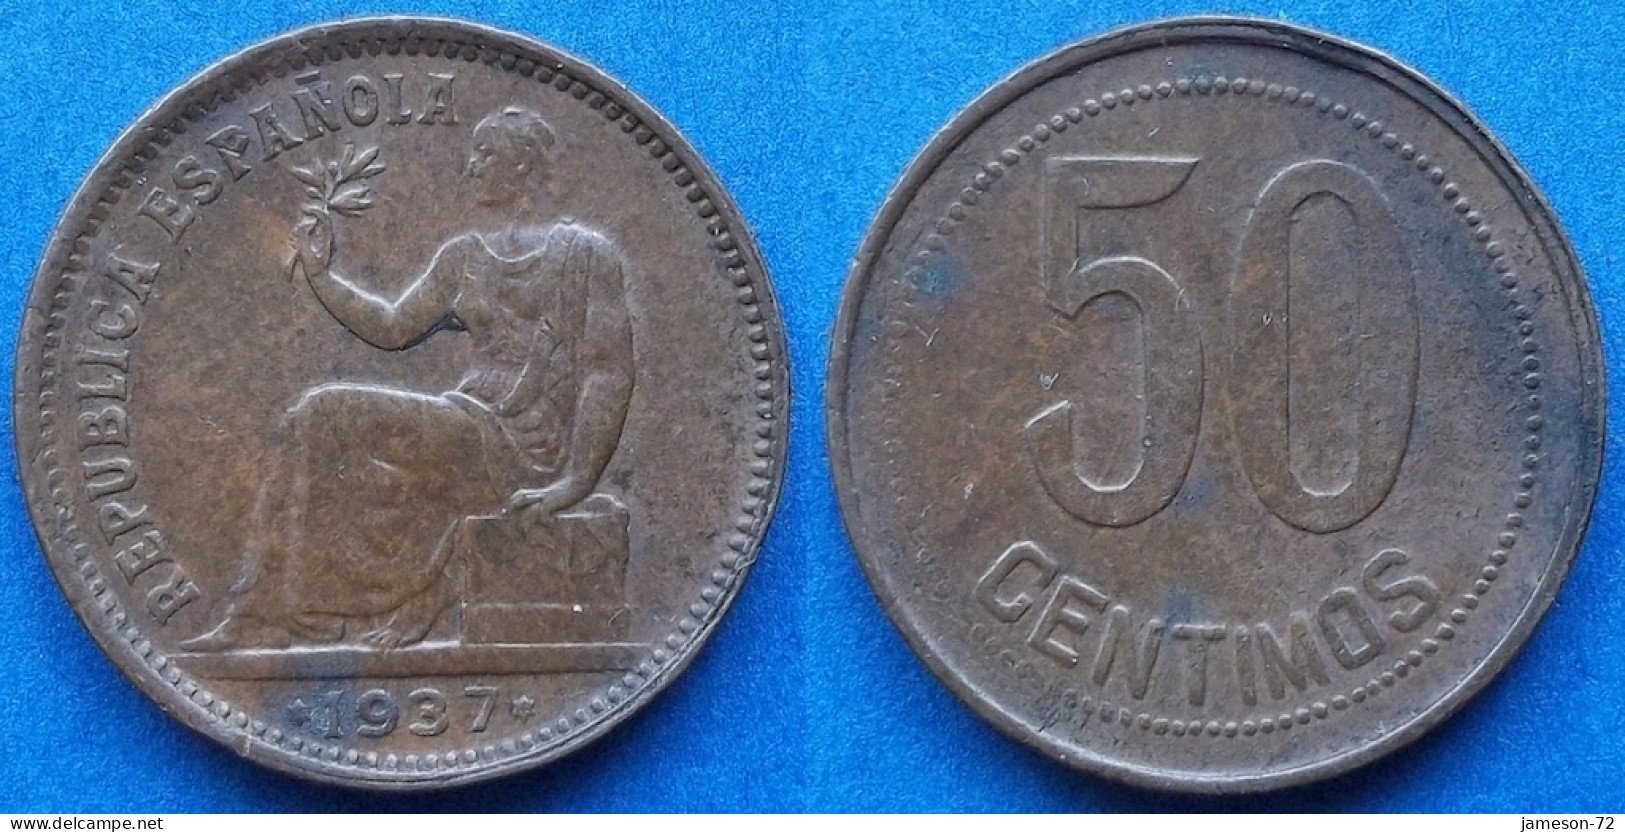 SPAIN - 50 Centimos 1937 *3 *7 "Seated Hispania Left Holding Sprig" KM# 754.1 II Republic (1931-1939) - Edelweiss Coins - 50 Centimos